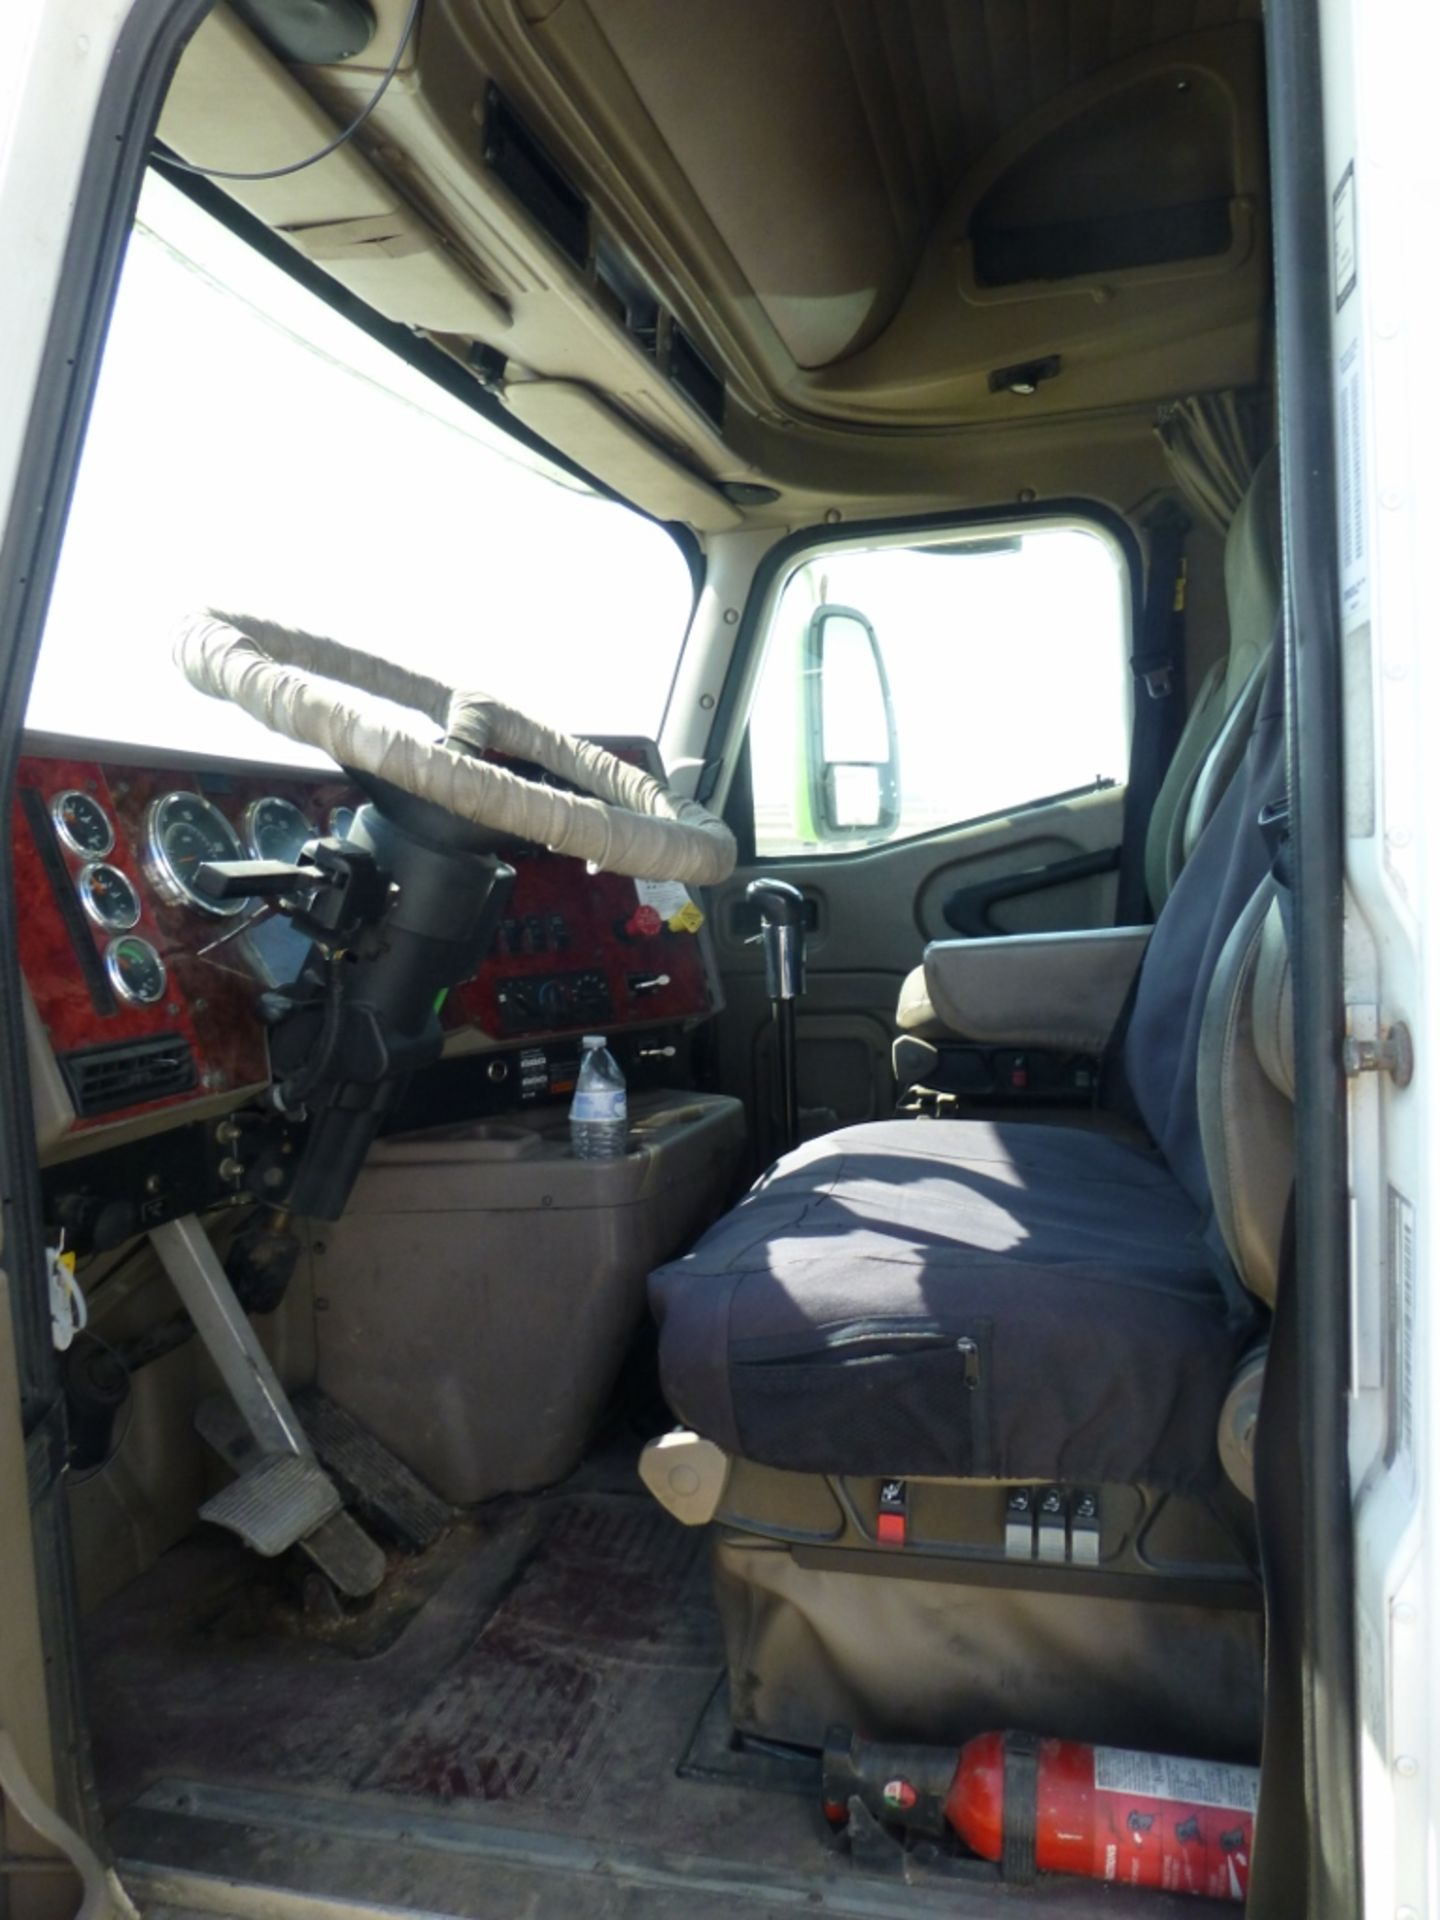 2004 IH 9400I 6x4 tractor - Image 7 of 29